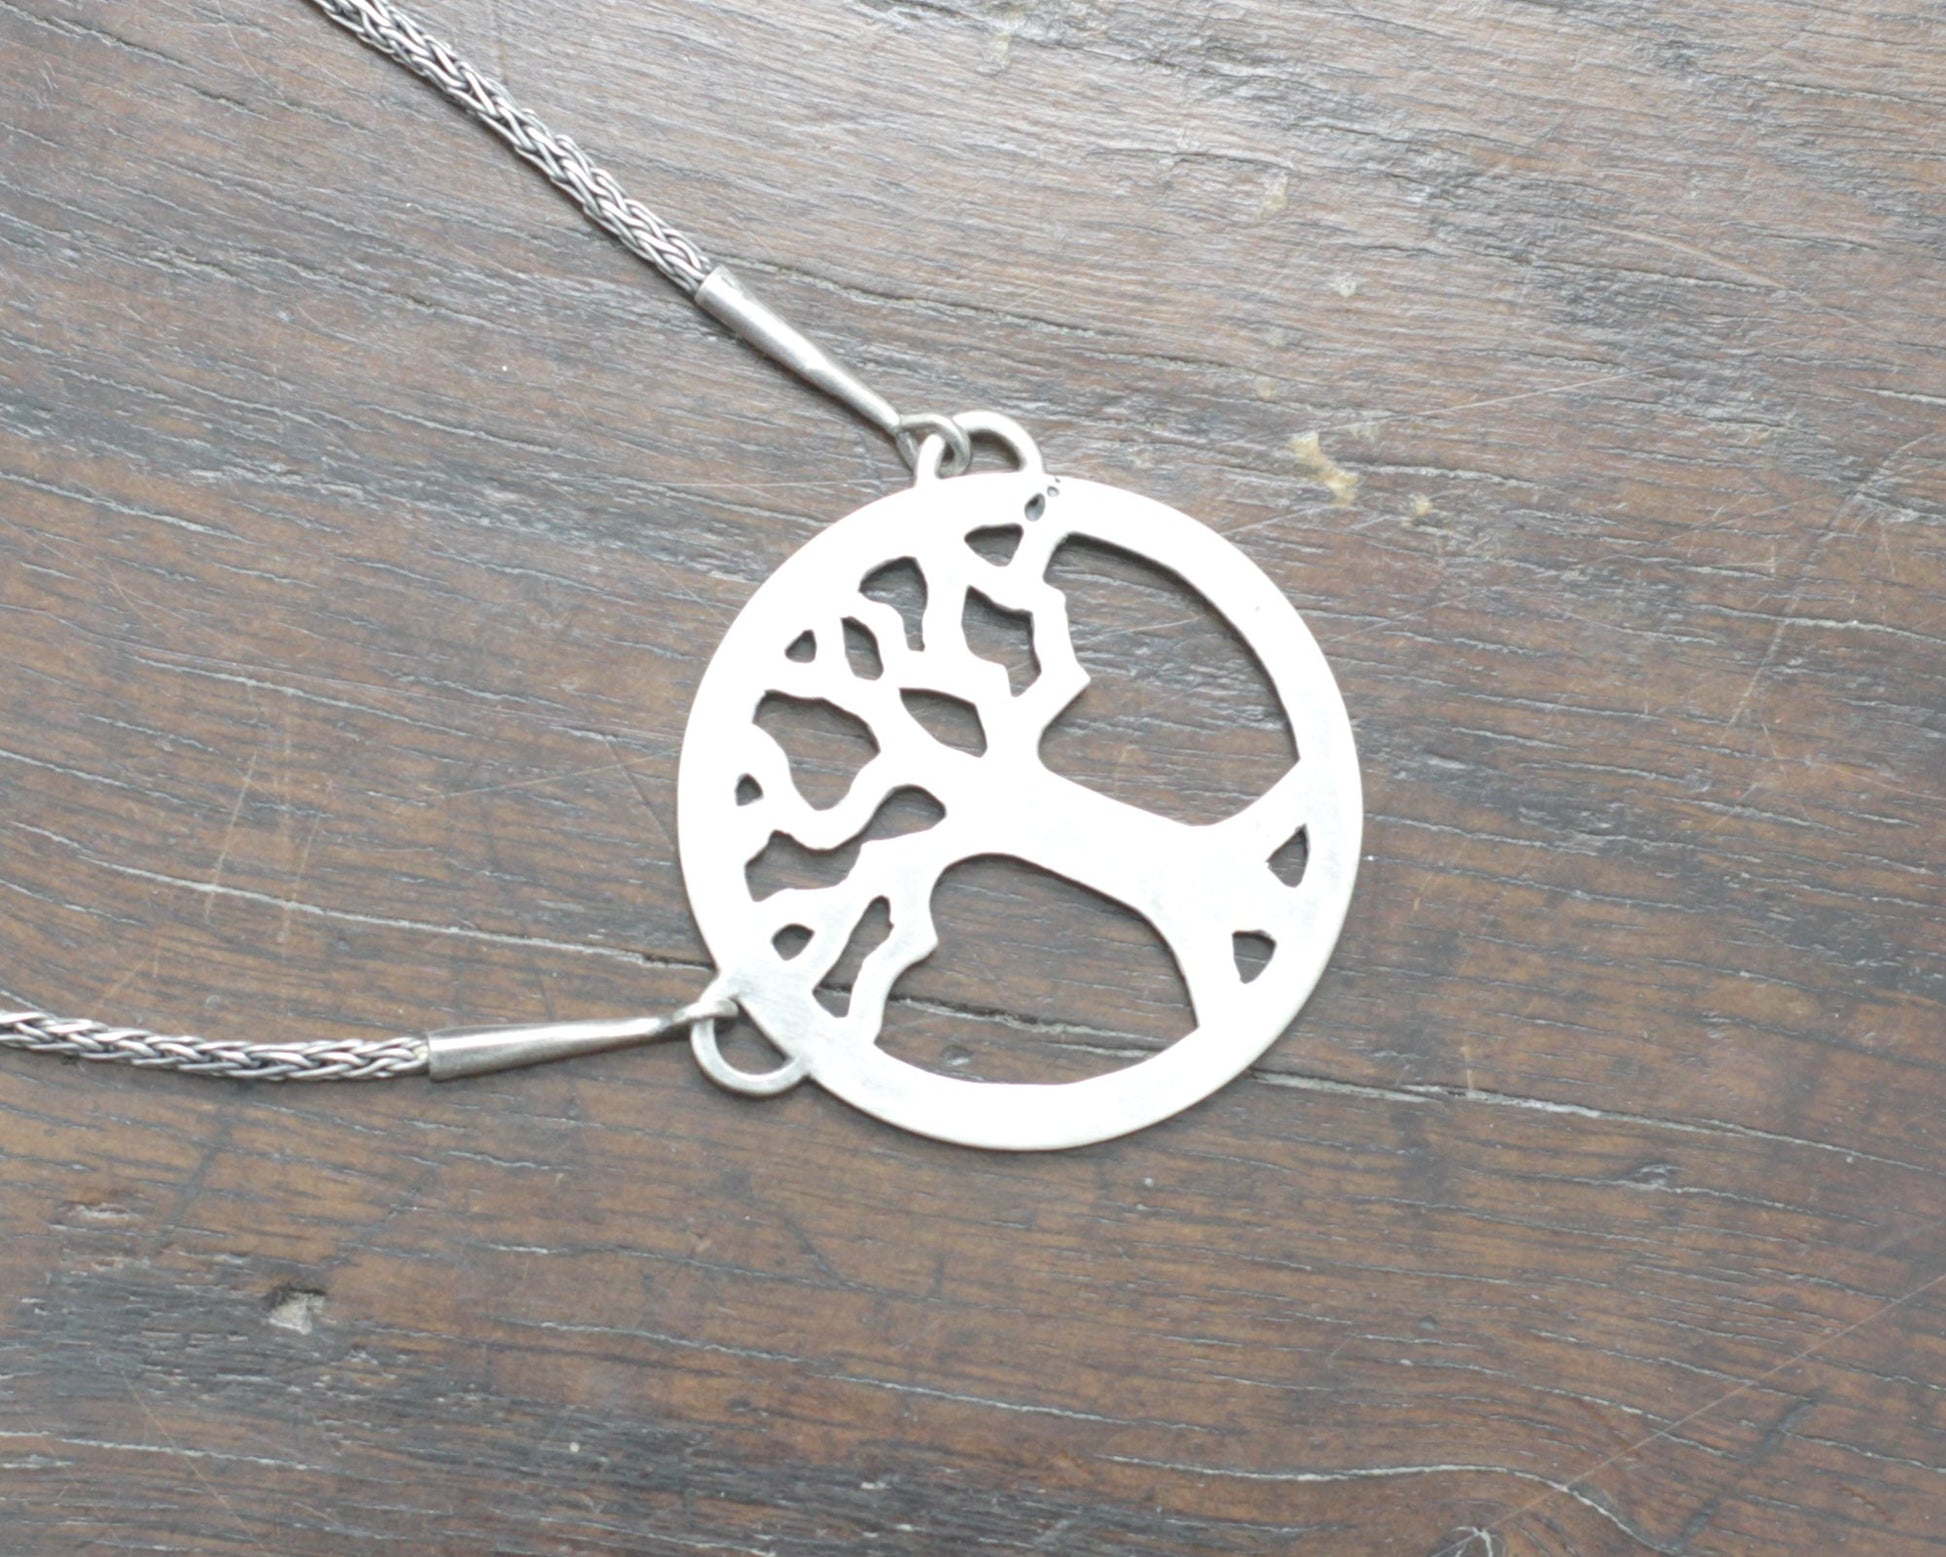 Silver Yggdrasil Tree Necklace by Taitaya Forge, Design by Marleena Barran - Back of the pendant